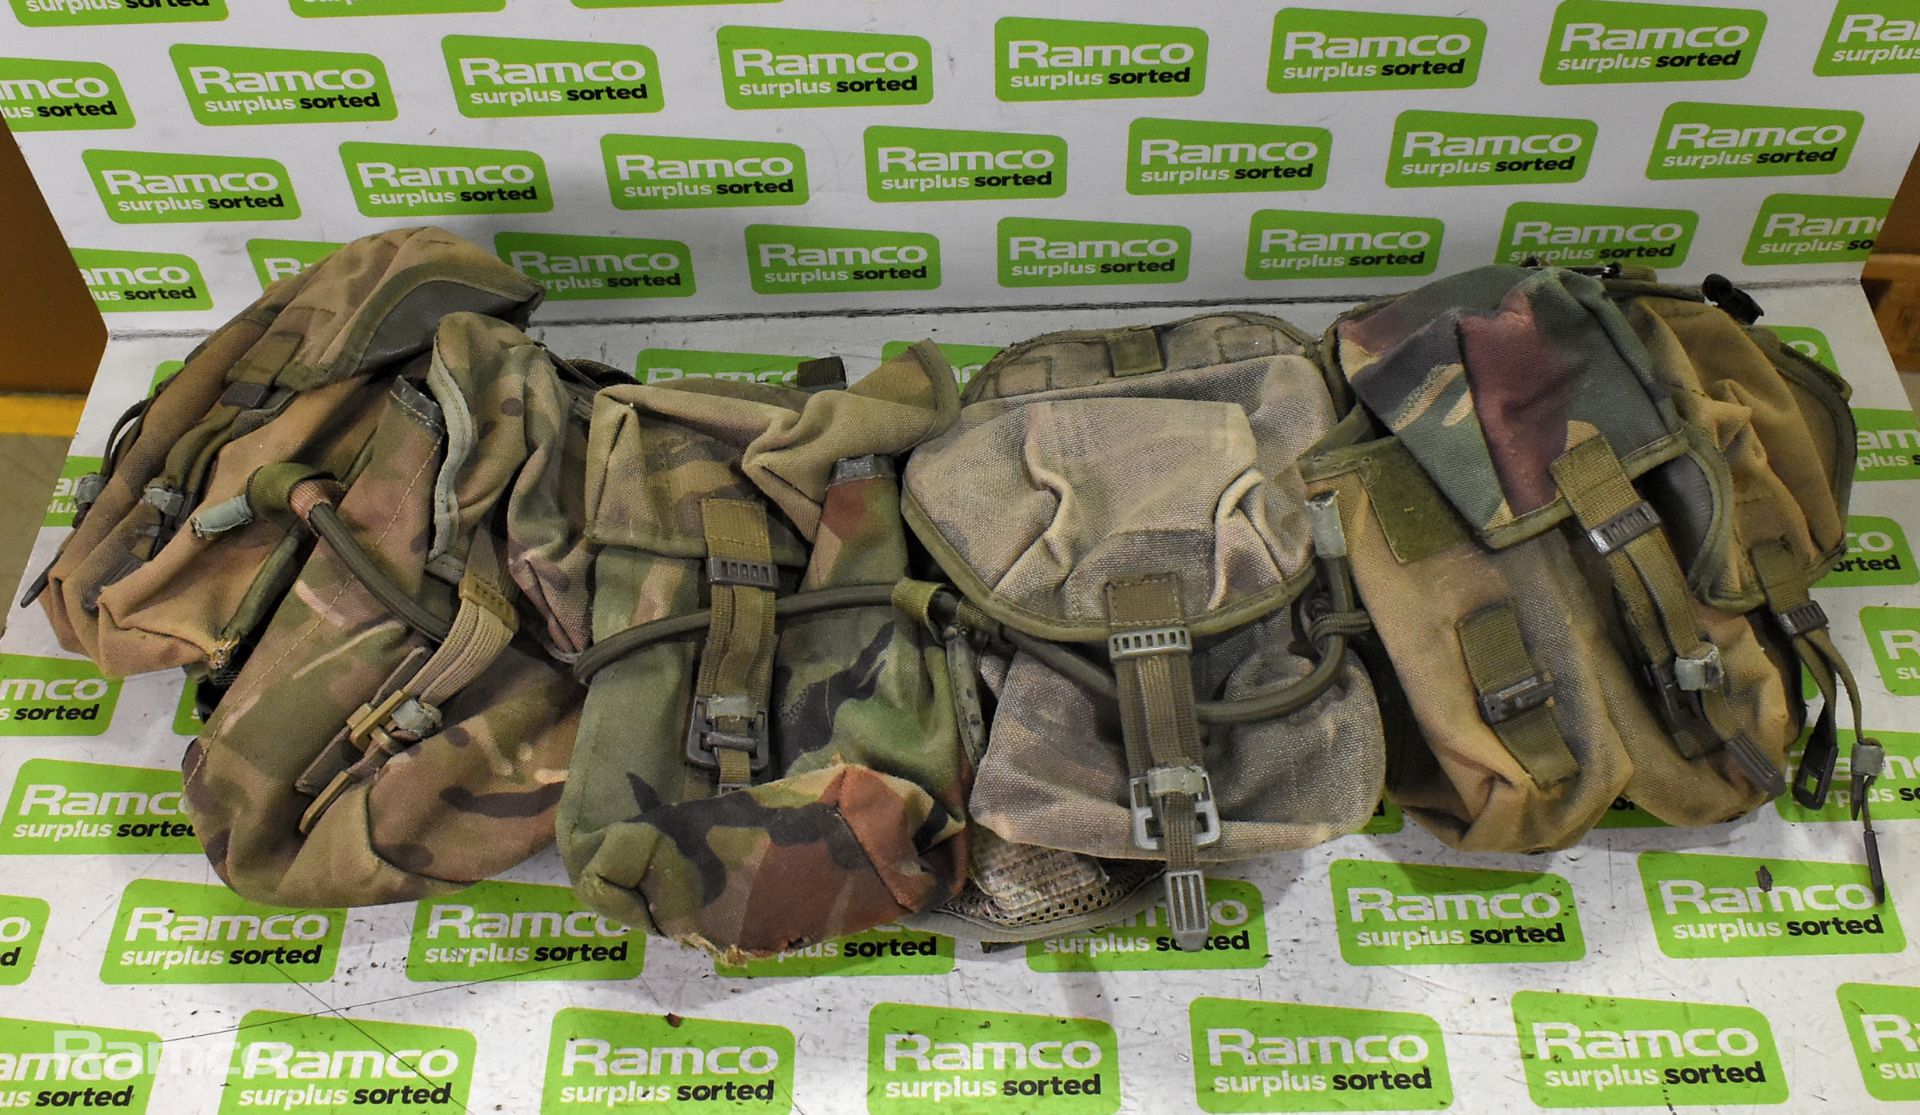 38x British Army DPM vests with pouches - mixed grades and sizes